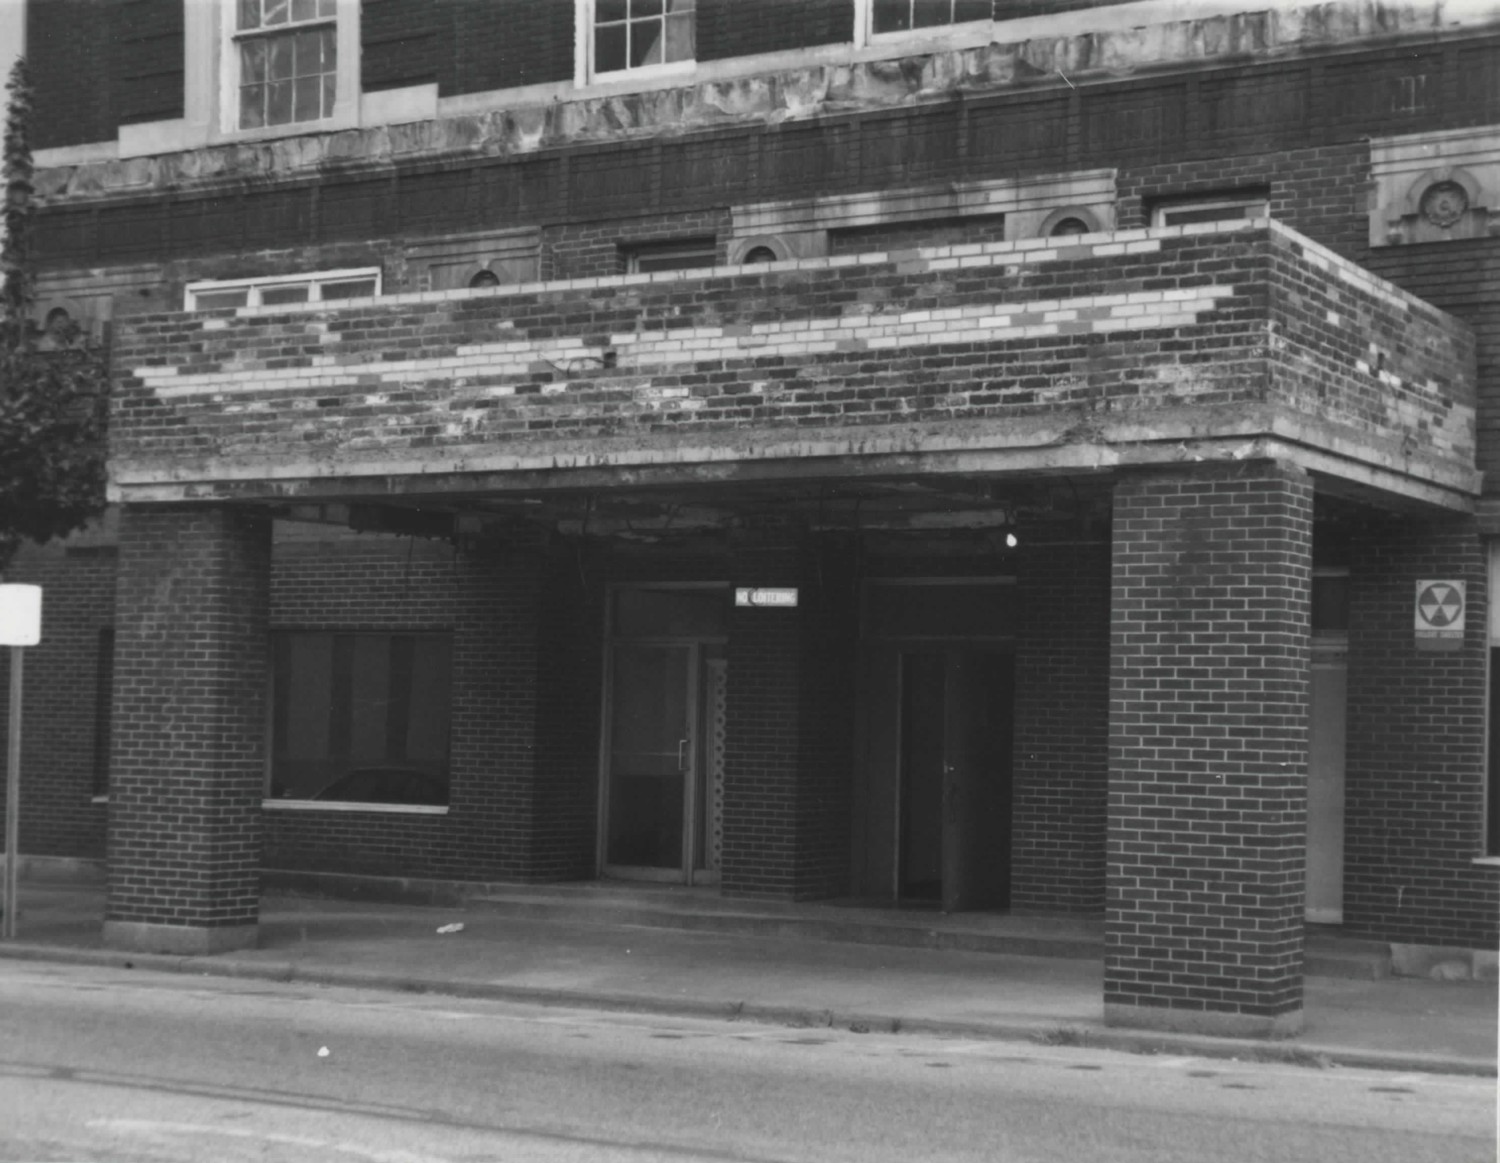 Marting Hotel, Ironton Ohio North elevation - detail of marquee without steel panels (1998)